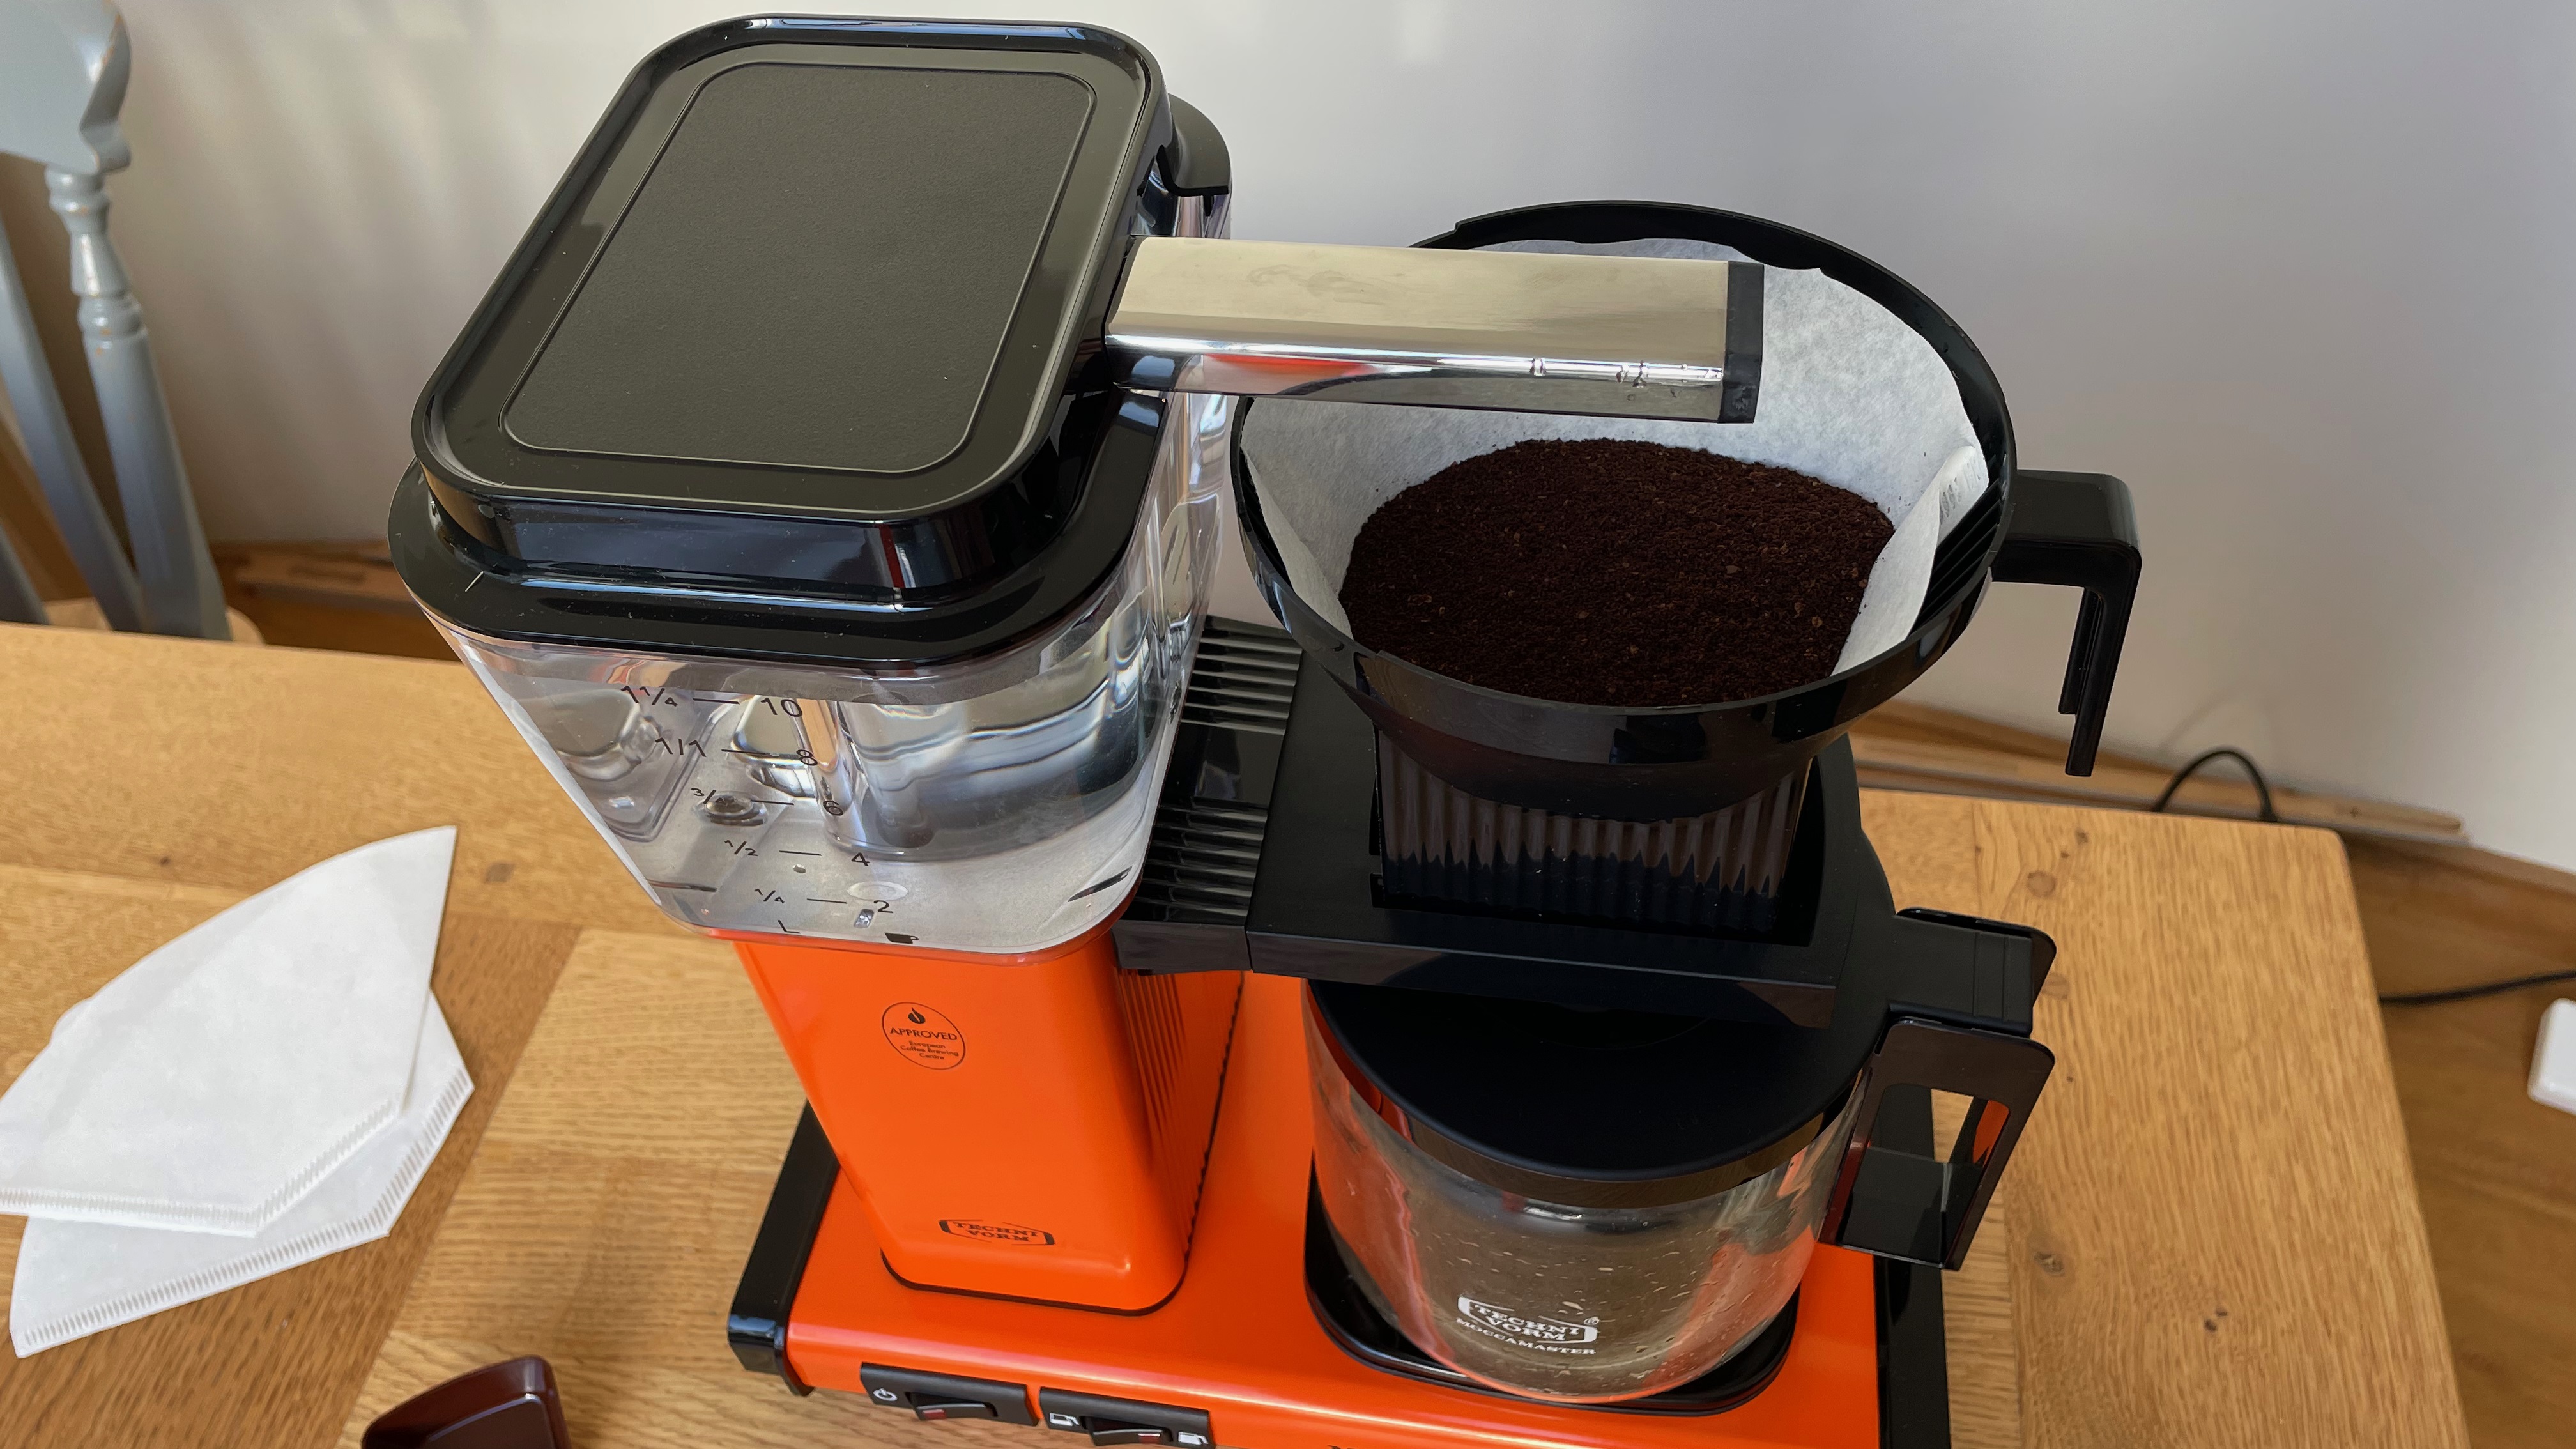 Moccamaster with grounds in filter paper